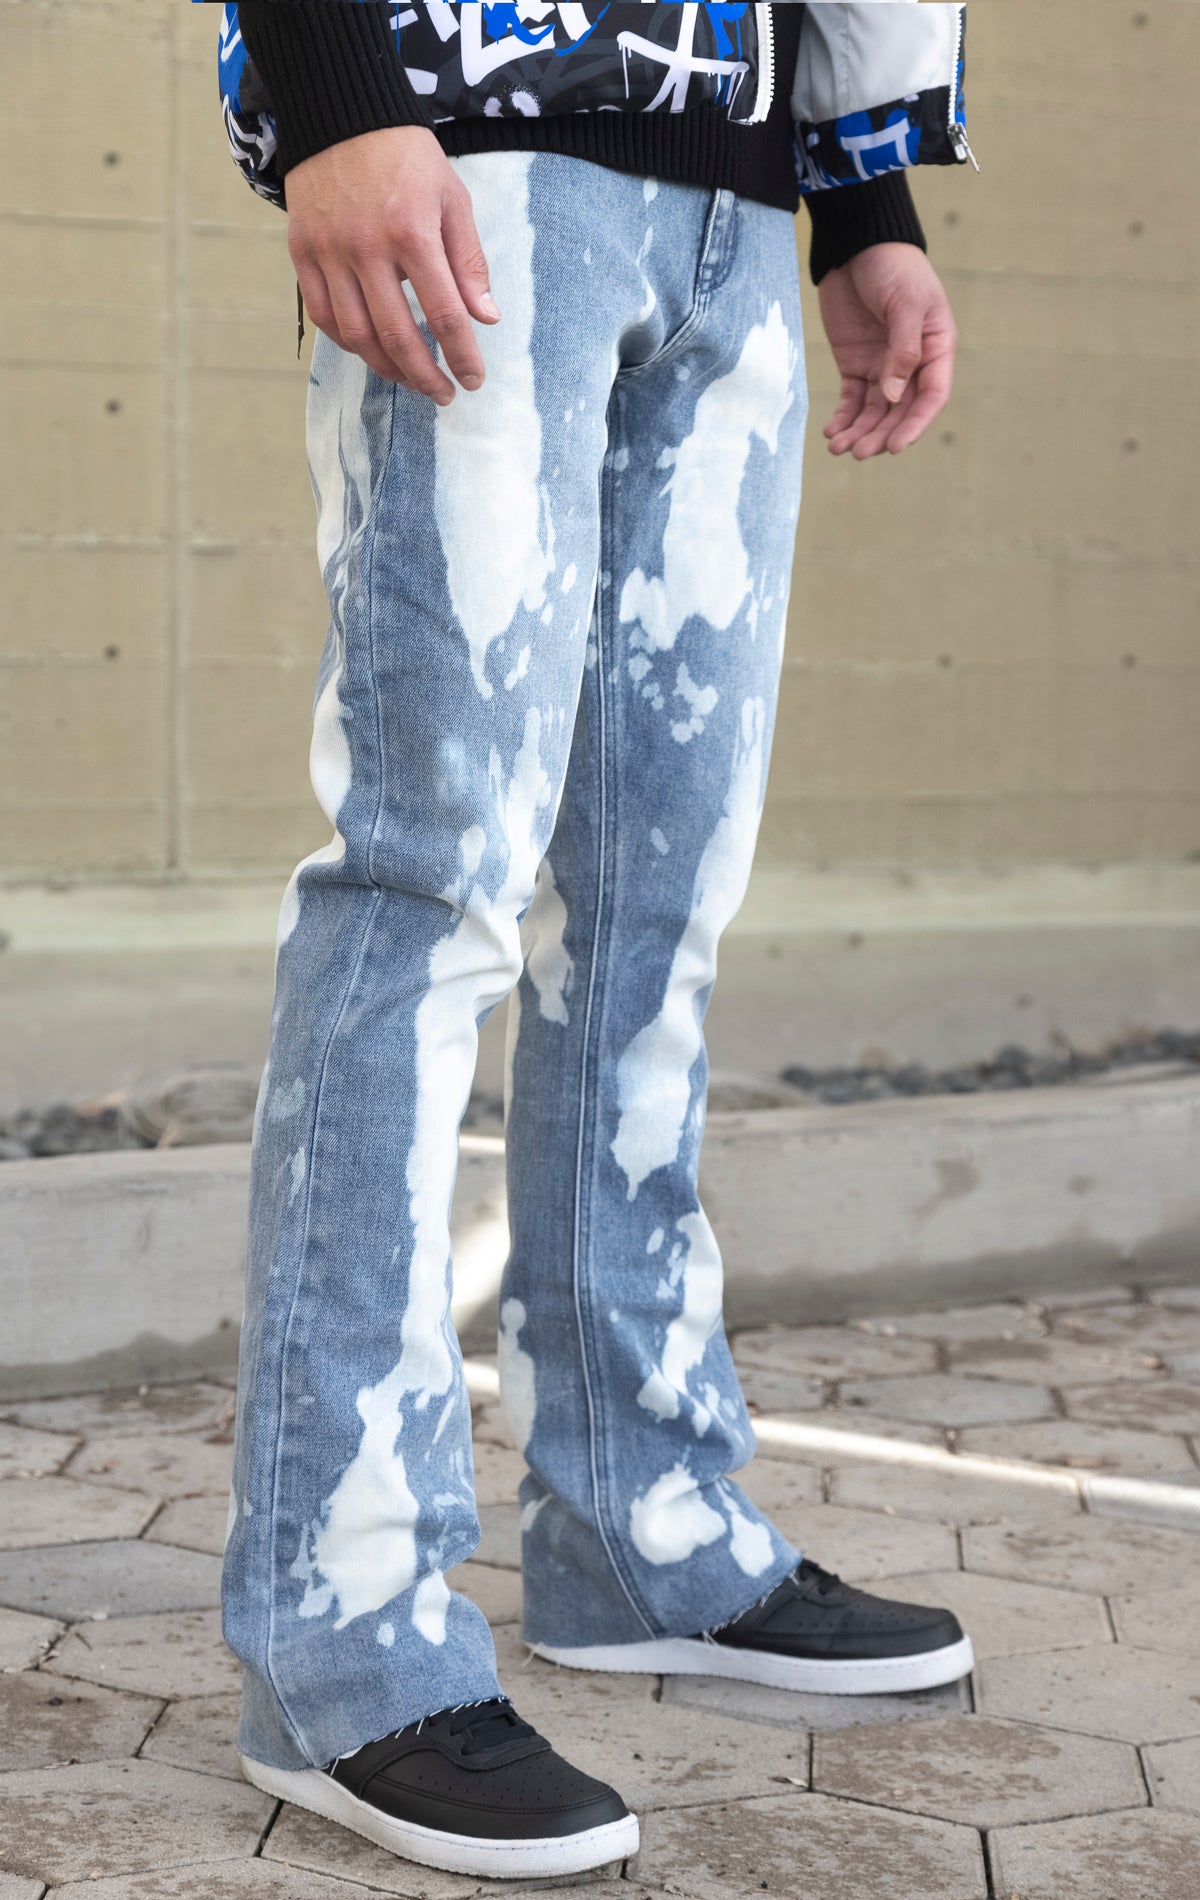 Indigo stacked flare jeans with a bleach wash finish